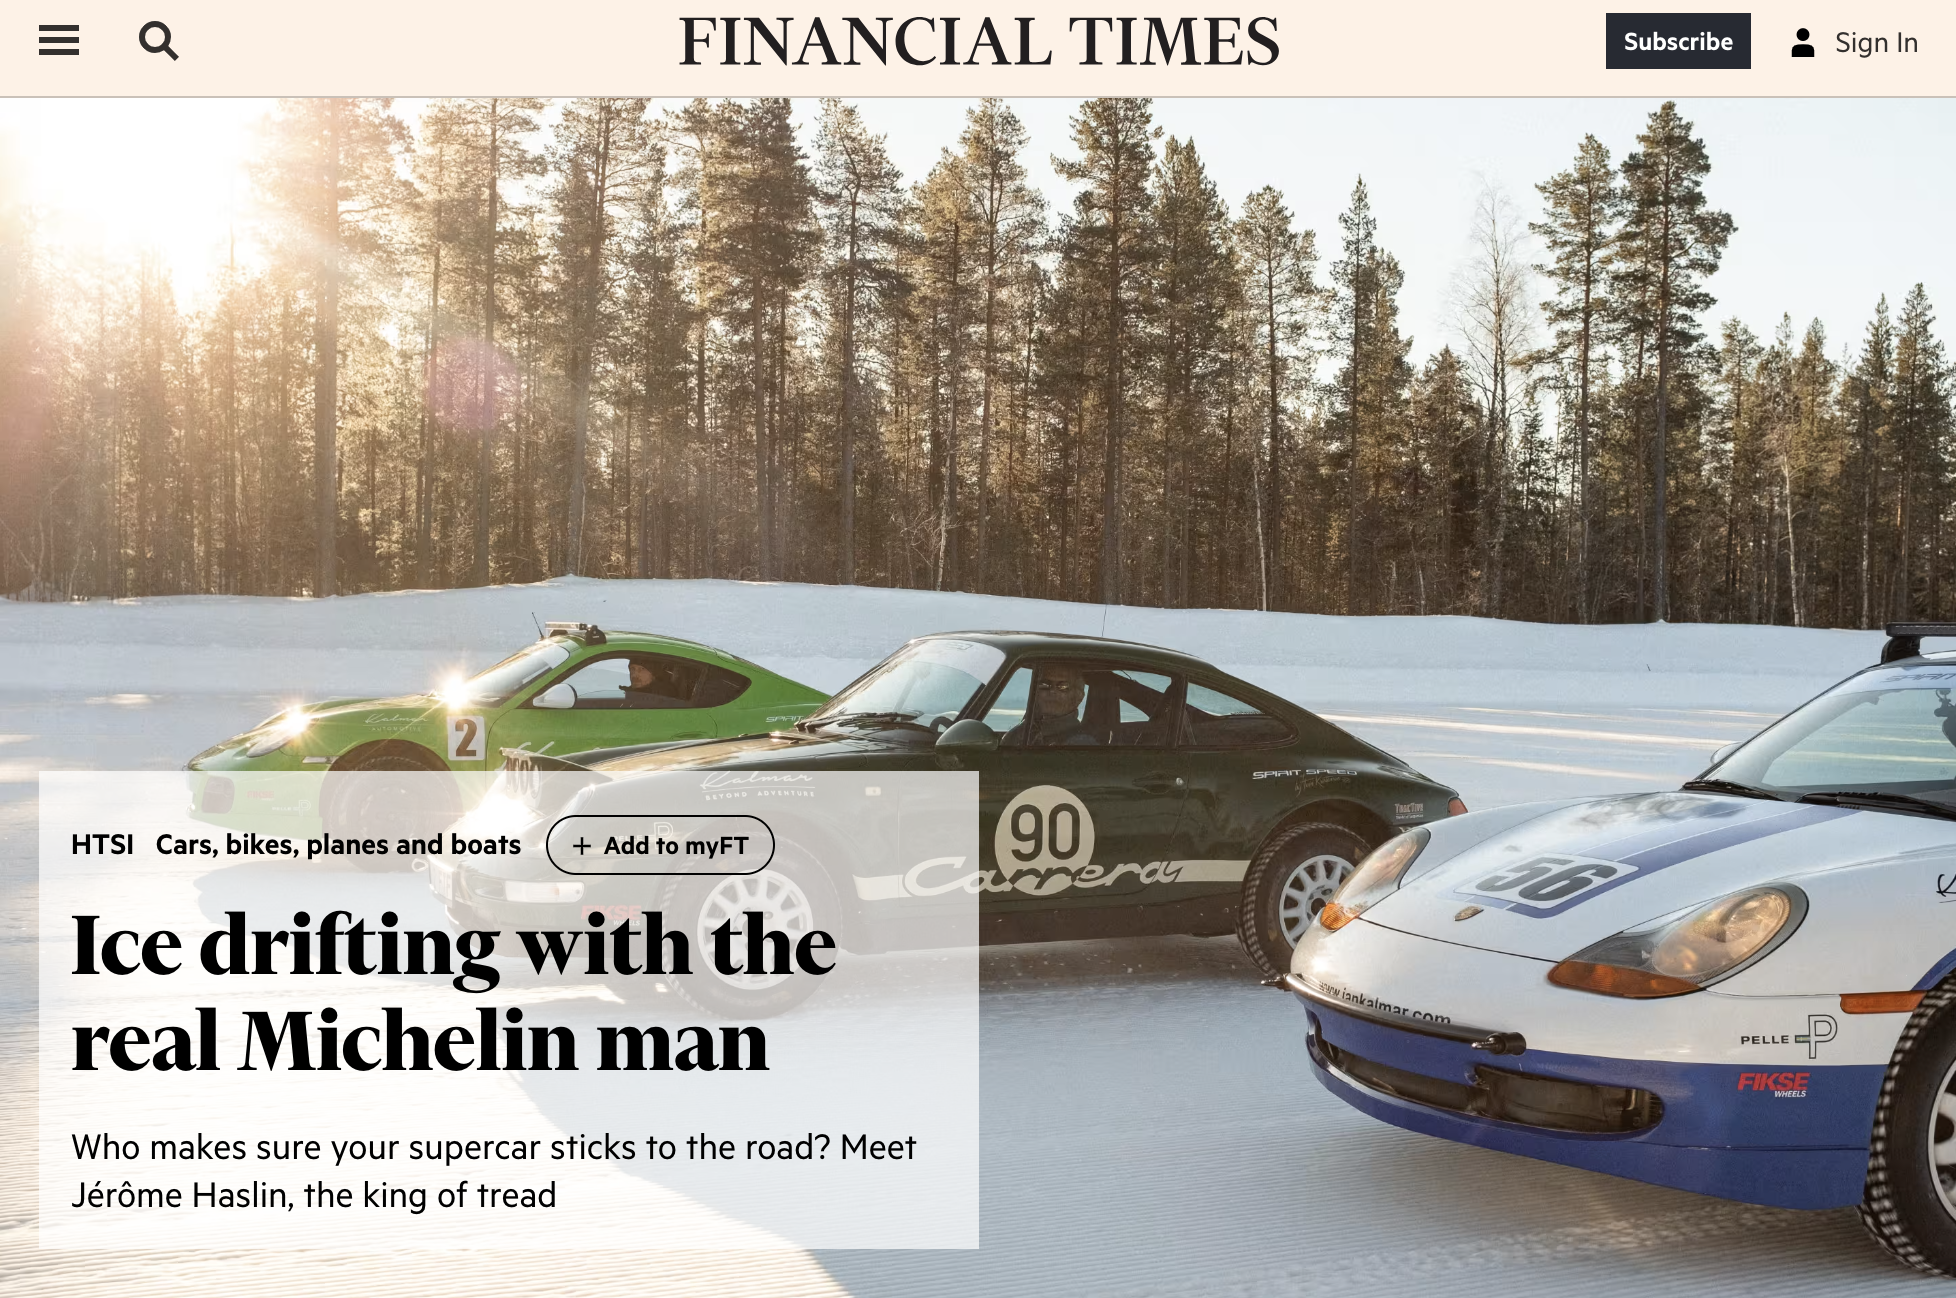 Financial Times HTSI - Ice drifting with the real Michelin man